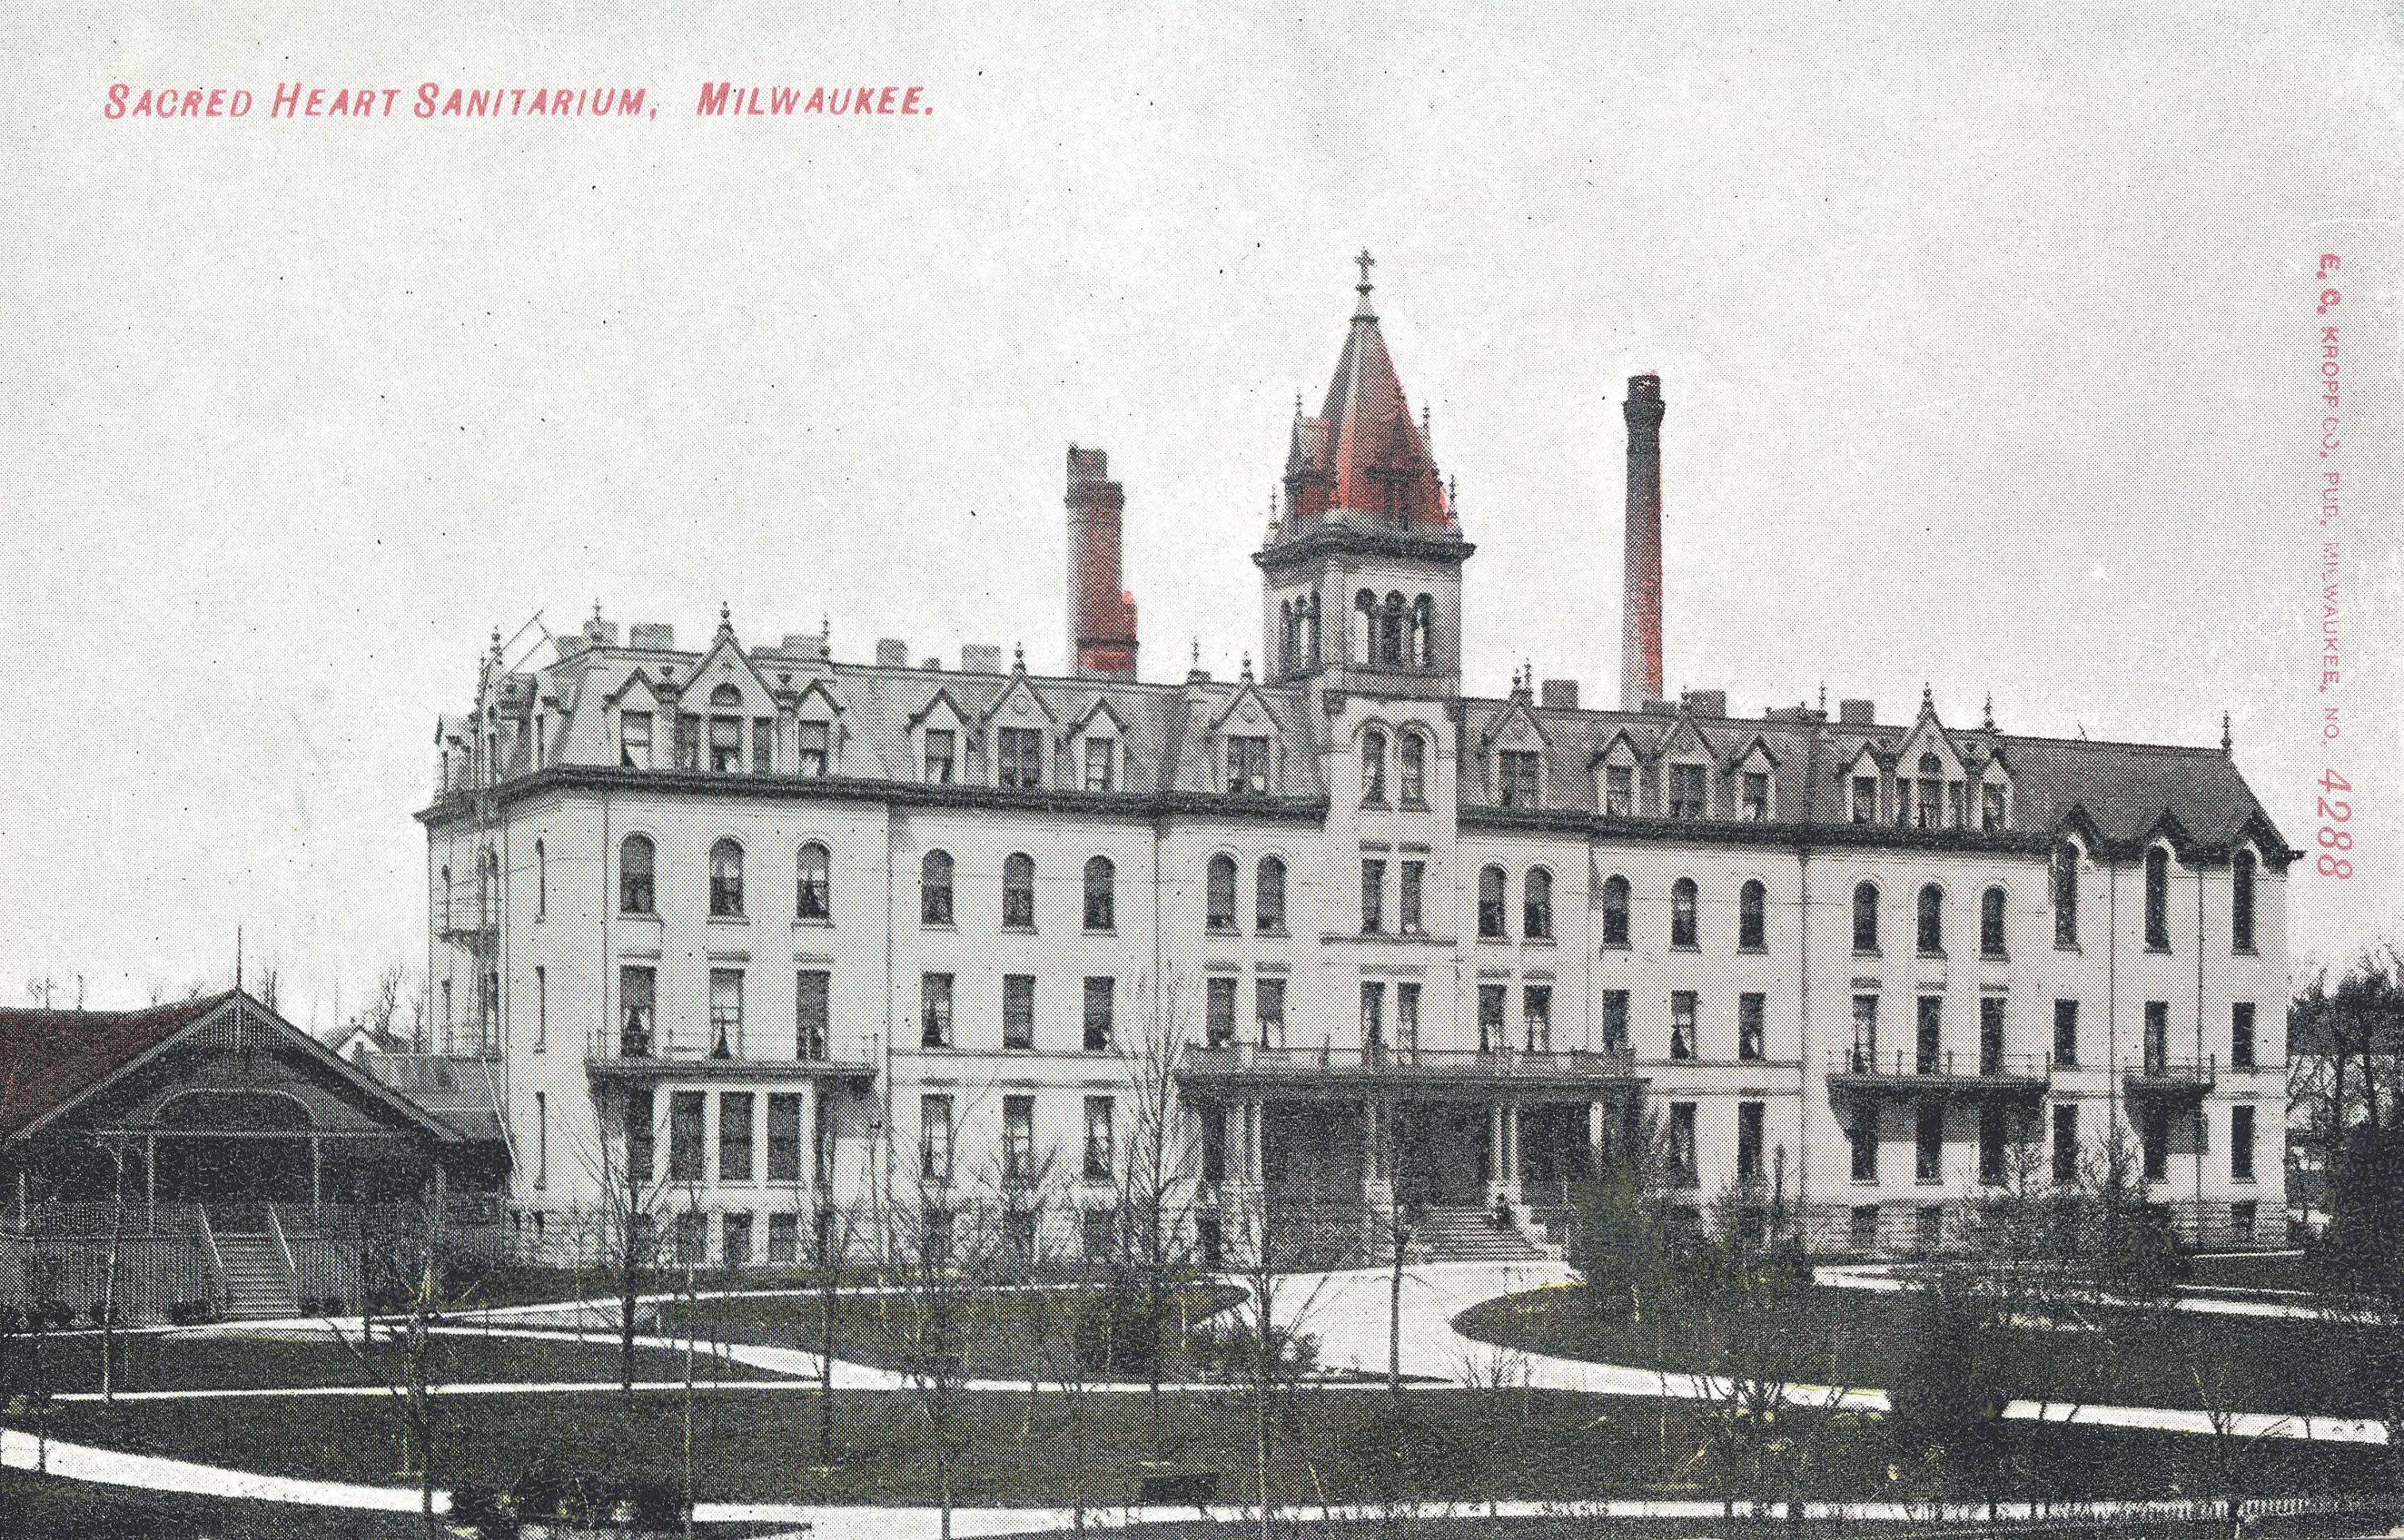 Sacred Heart Sanitarium opened in 1893 and was one of several private institutions established in Milwaukee to treat and house individuals with mental disabilities. 